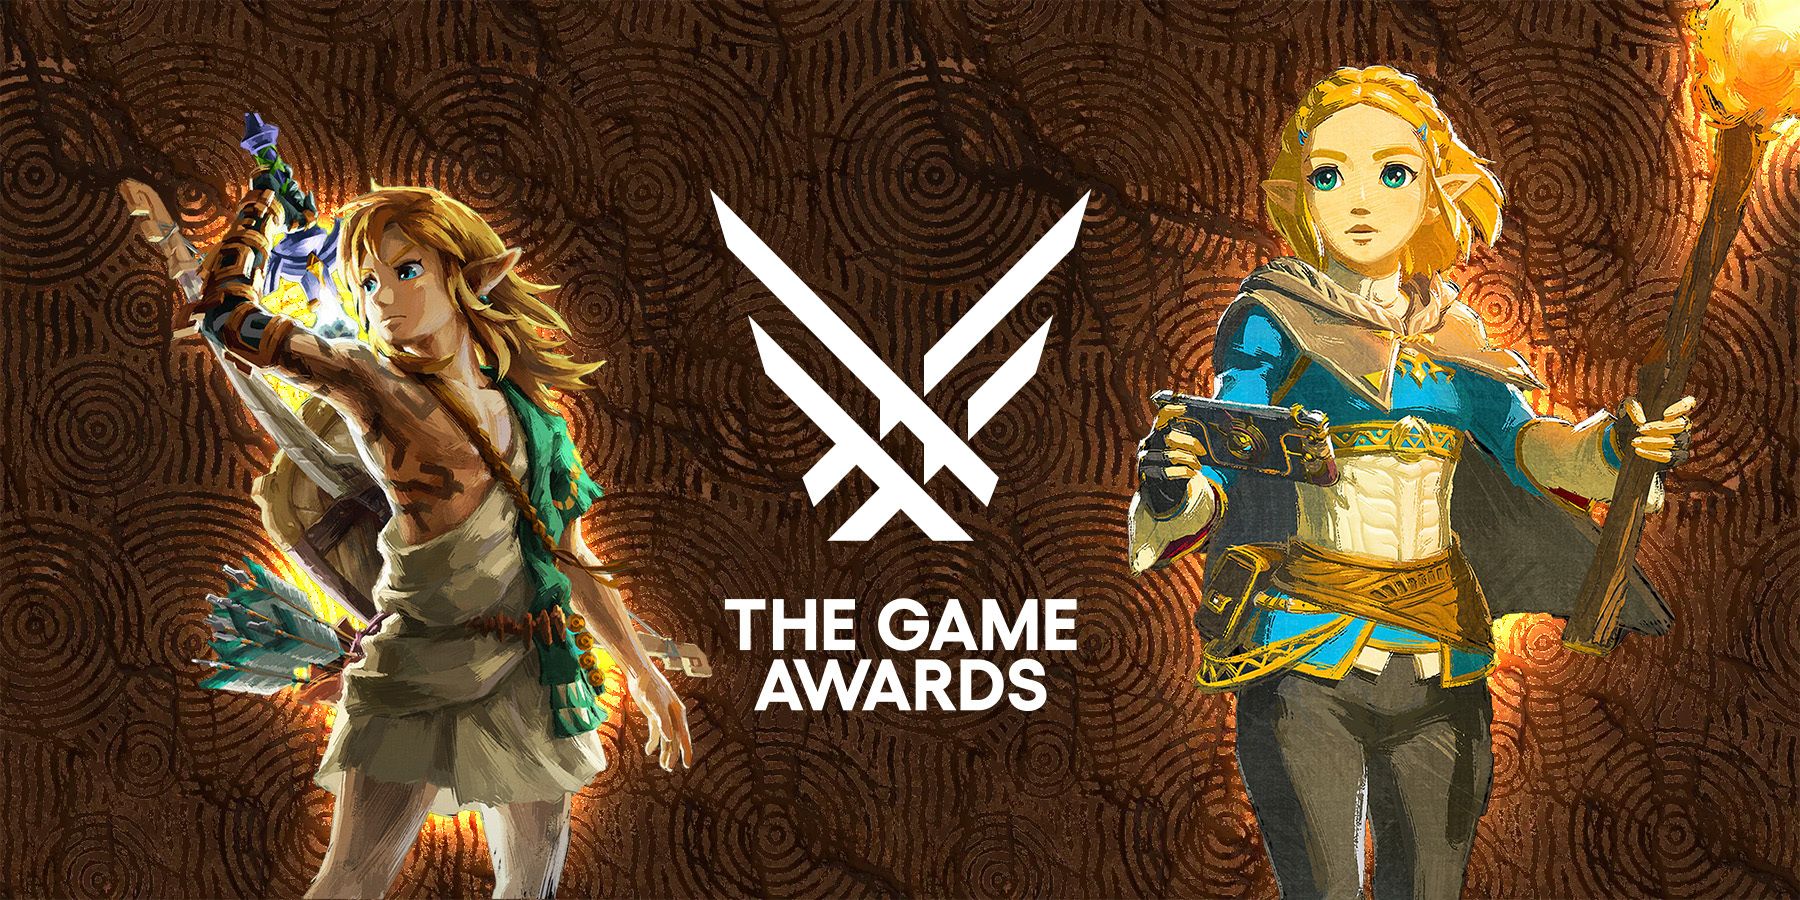 Coverage of the Mobile Gaming Awards 2023